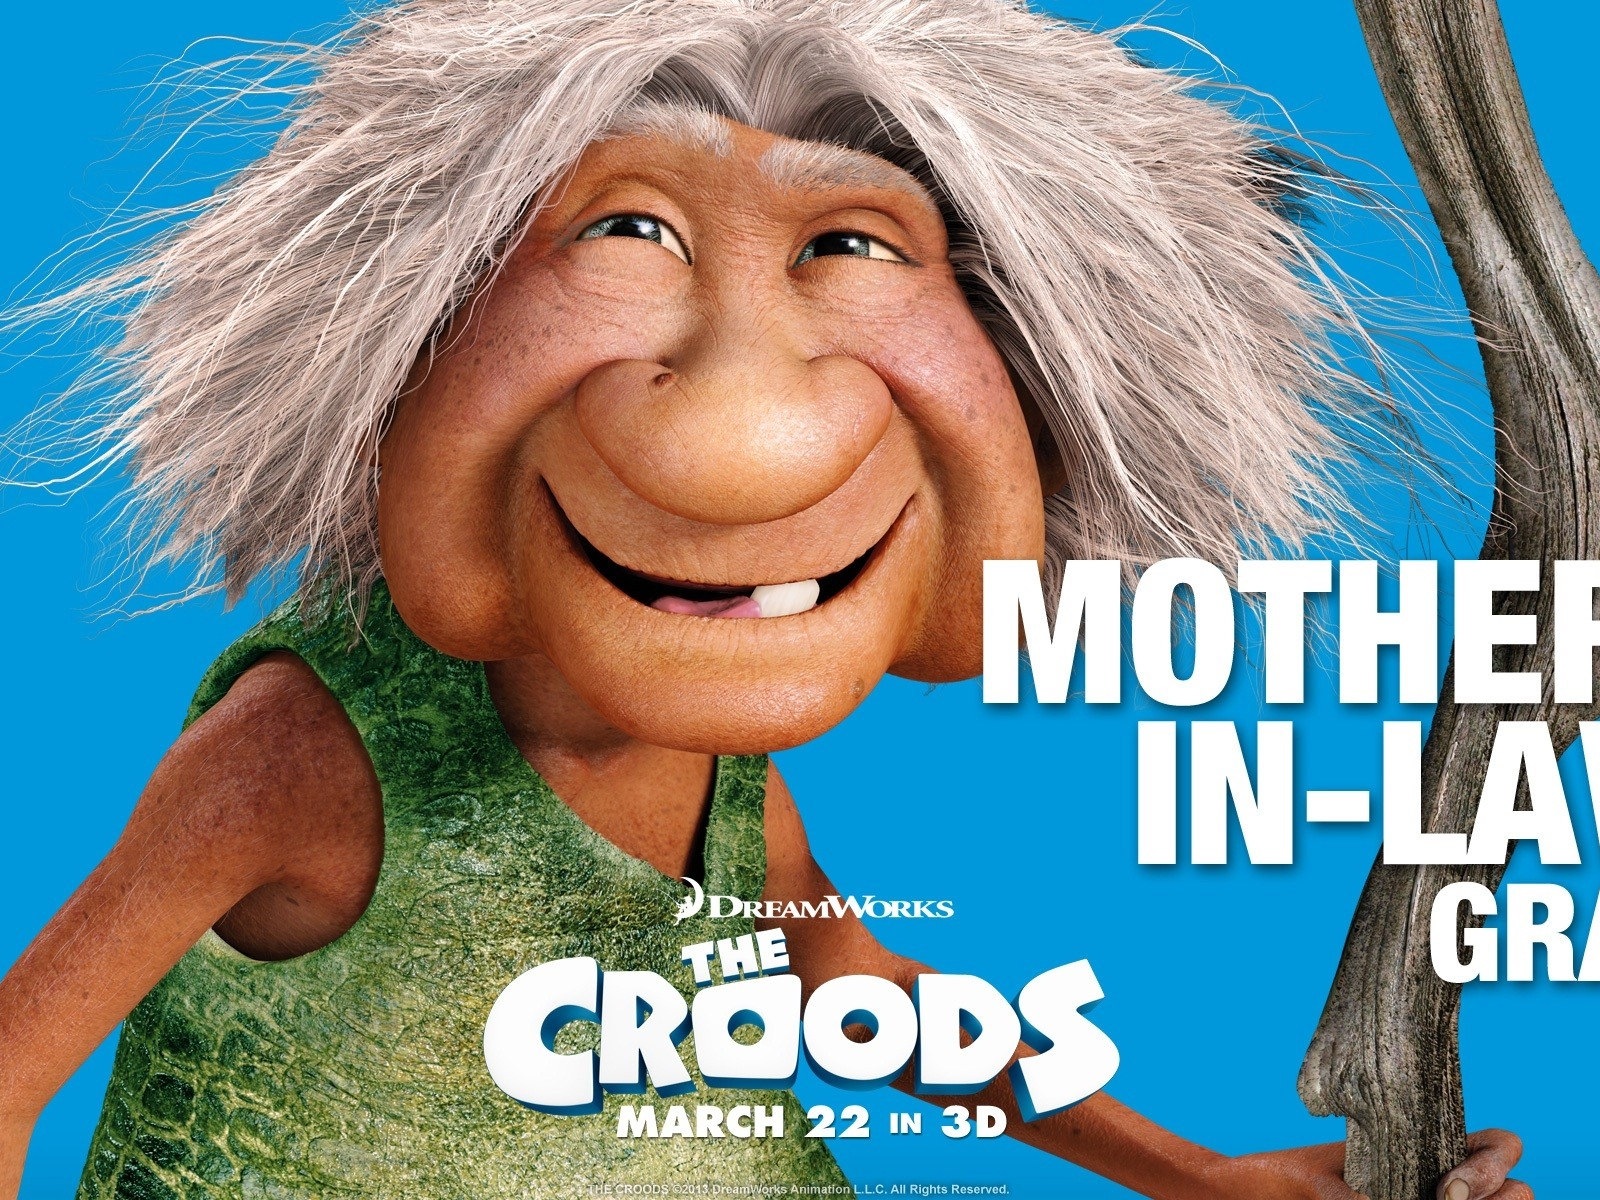 V Croods HD Movie Wallpapers #6 - 1600x1200